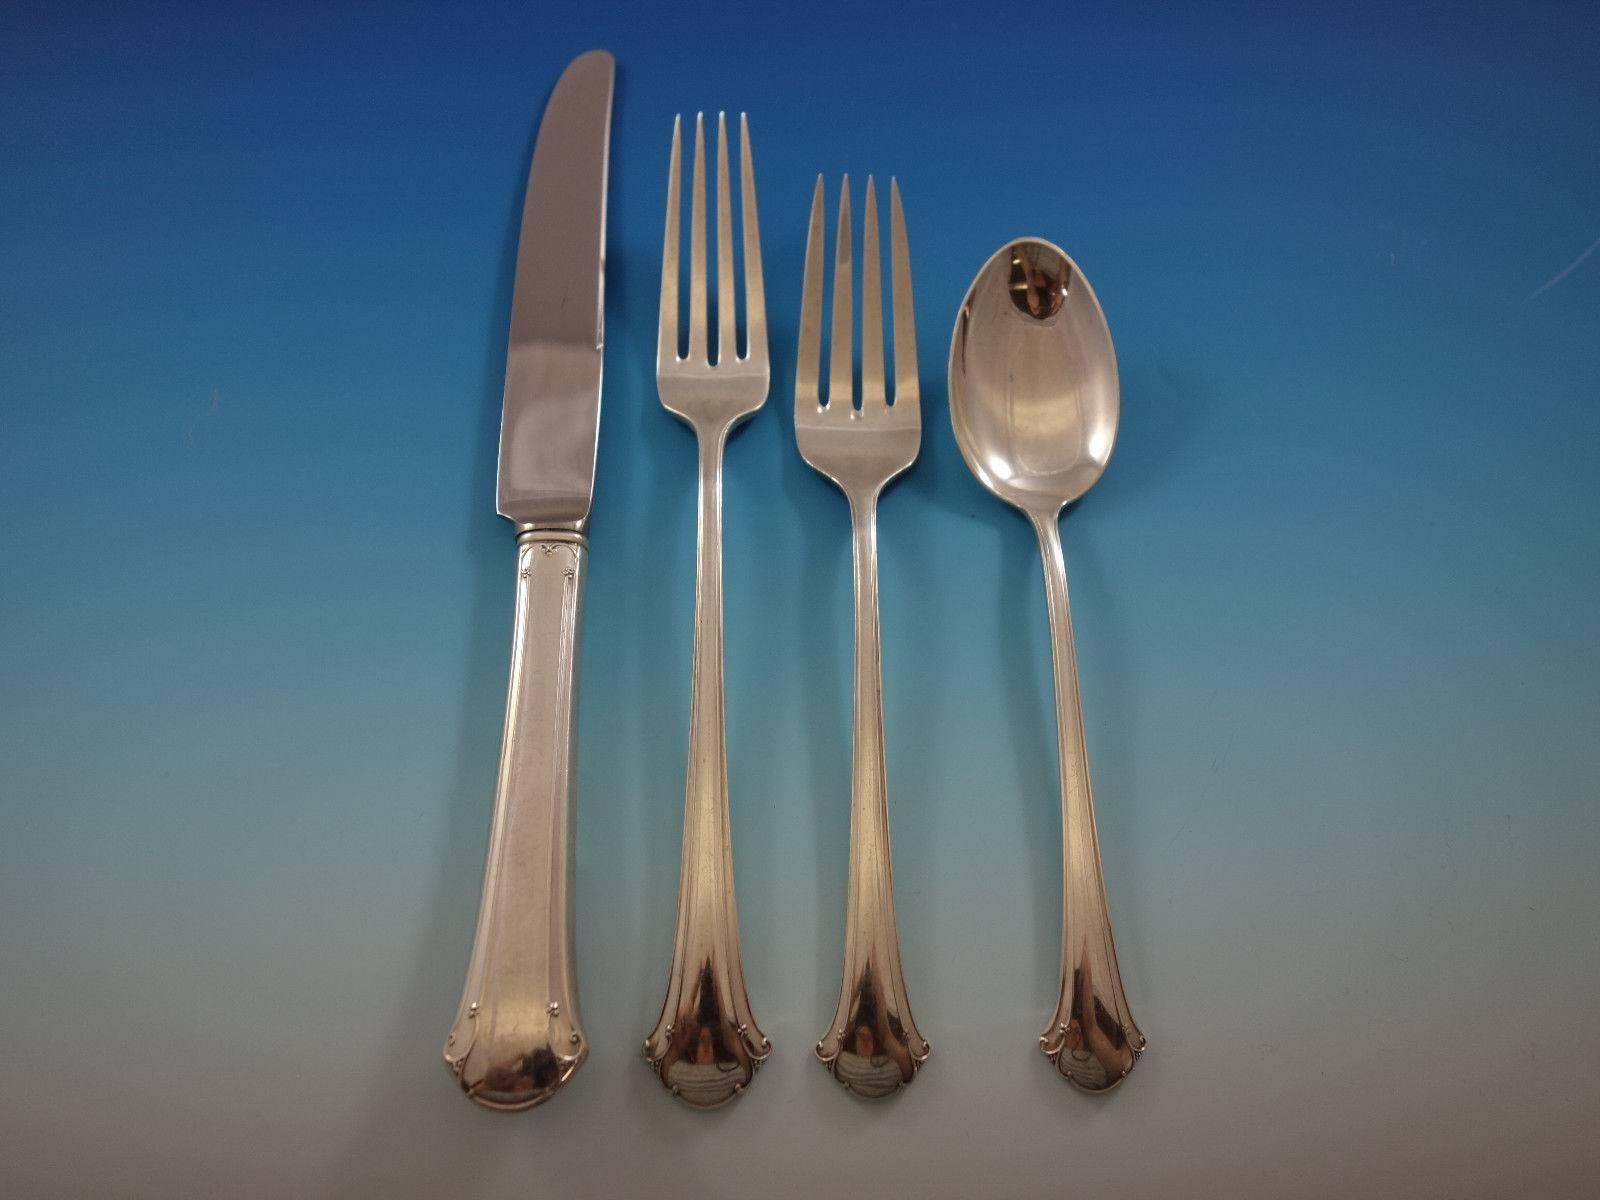 Chippendale by Towle sterling silver flatware set - 48 pieces. This set includes: 

eight knives, 8 3/4